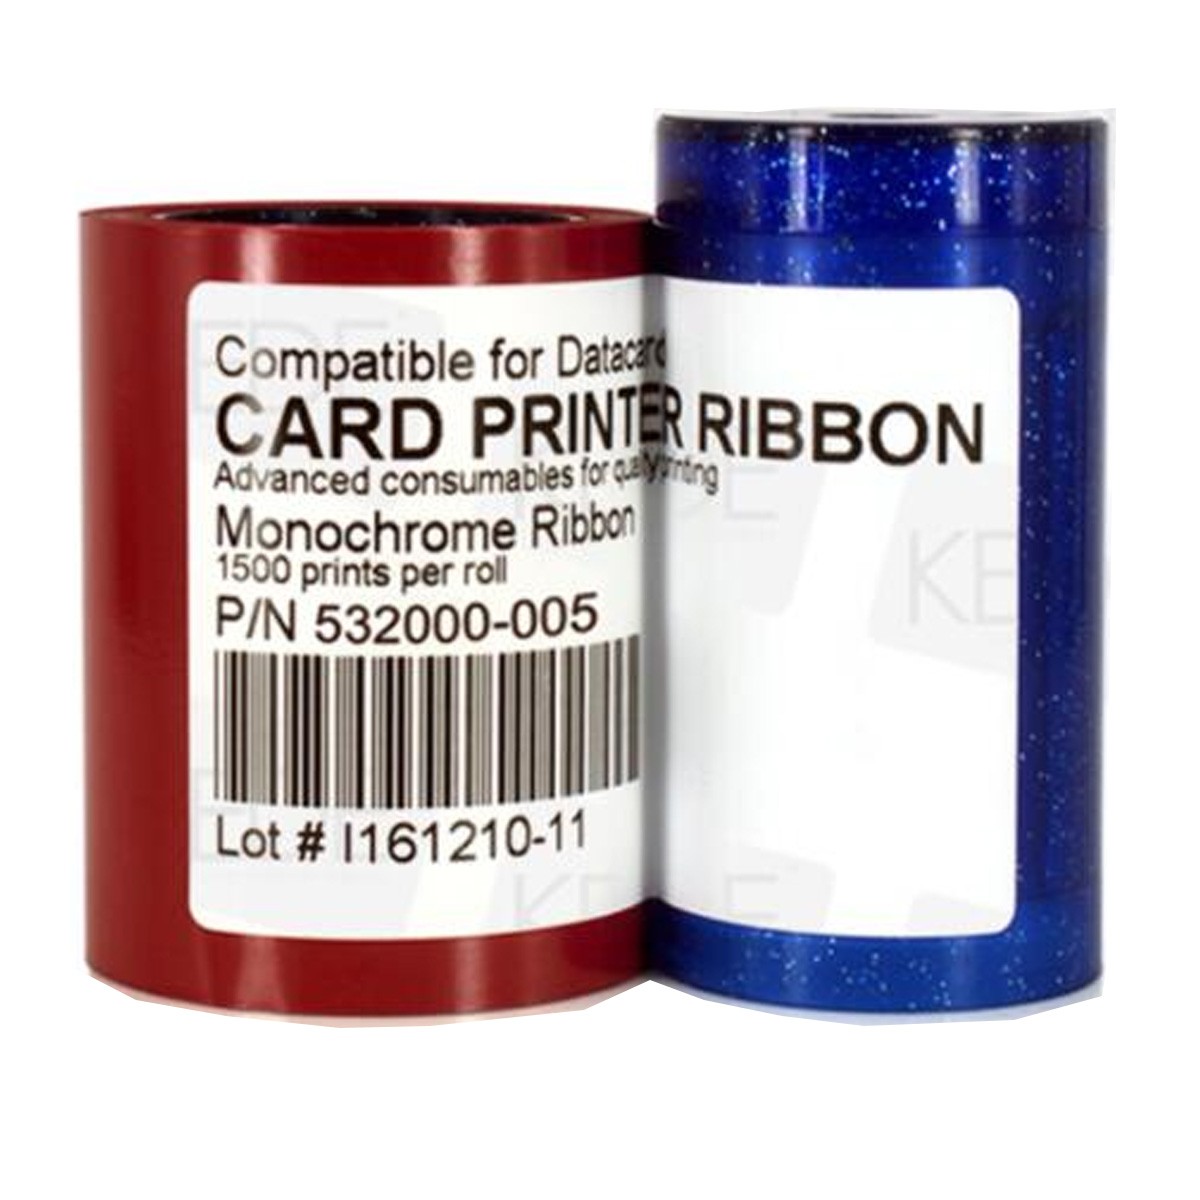 New compatible ribbon for Datacard 532000-005 552954-504 Red 150